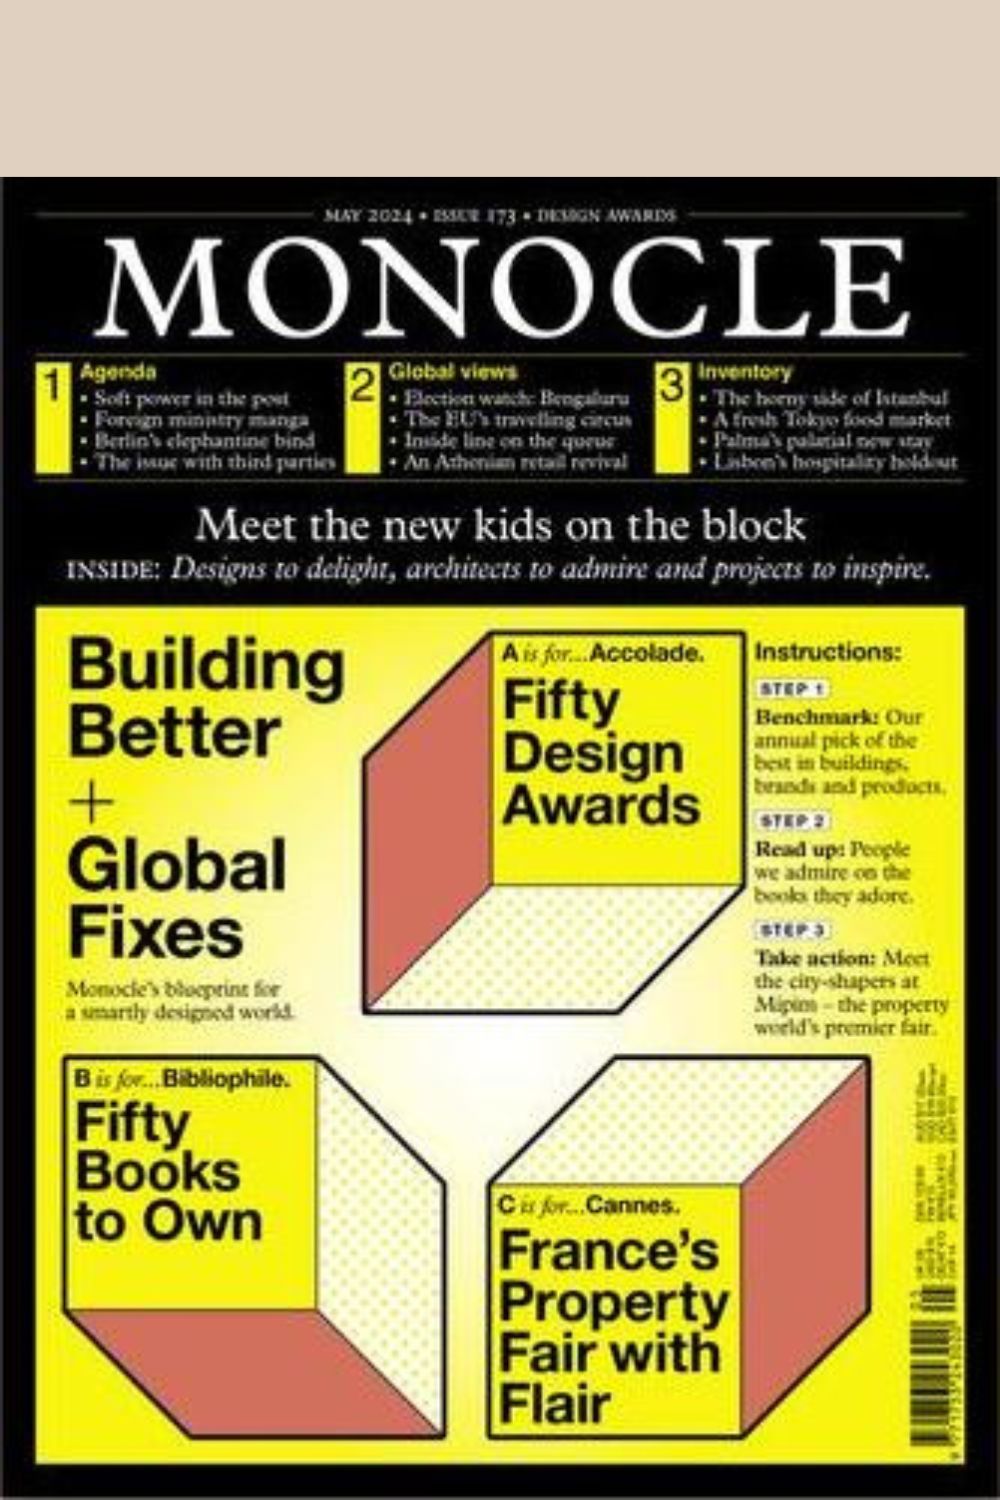 Monocle Magazine Issue 173 cover